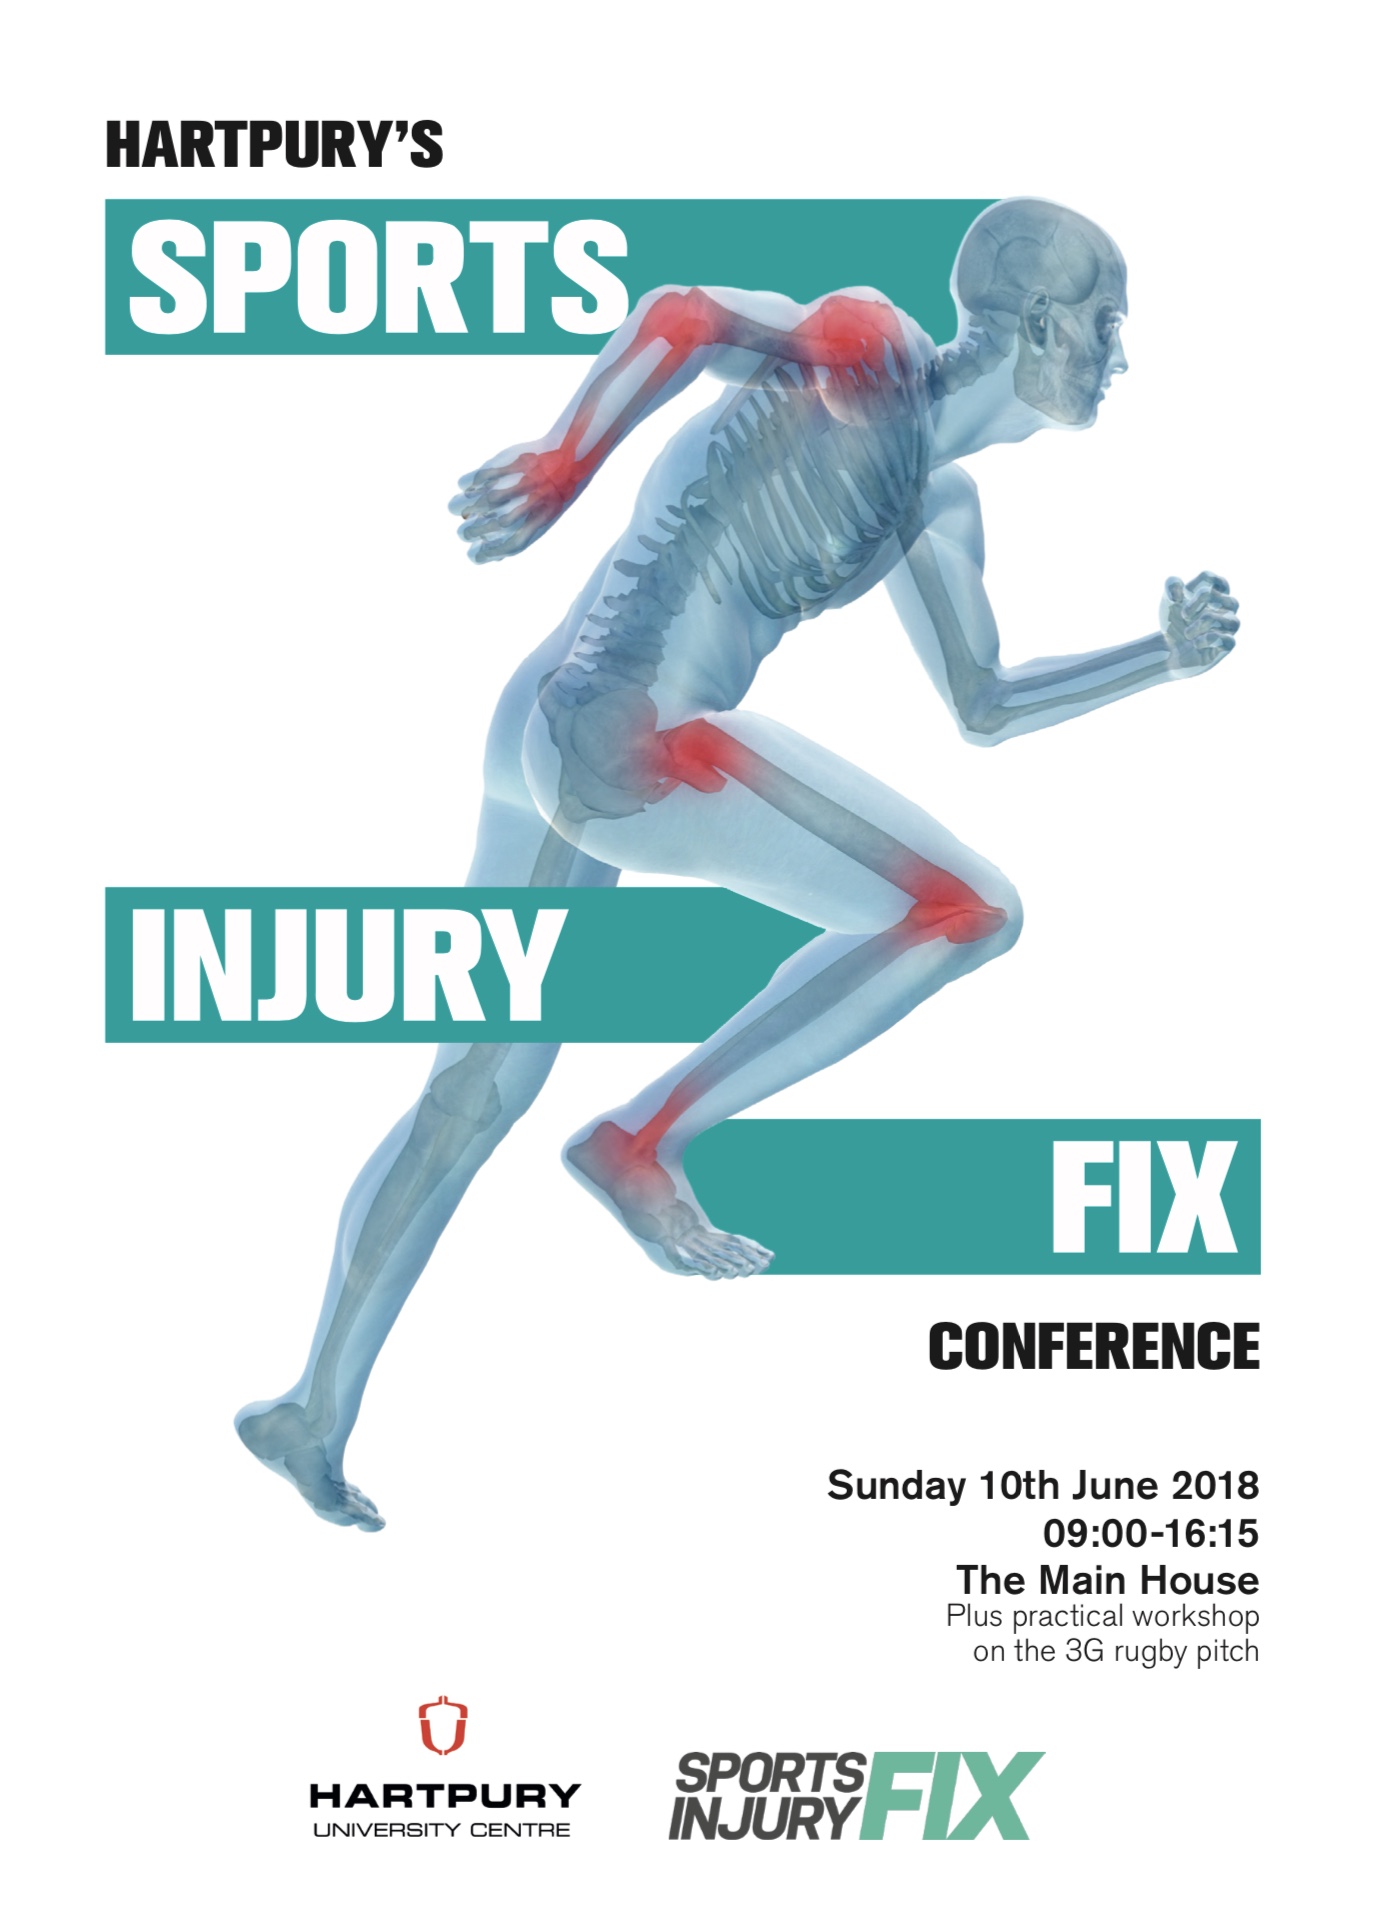 Sports Injury Fix conference flyer with Hartpury College